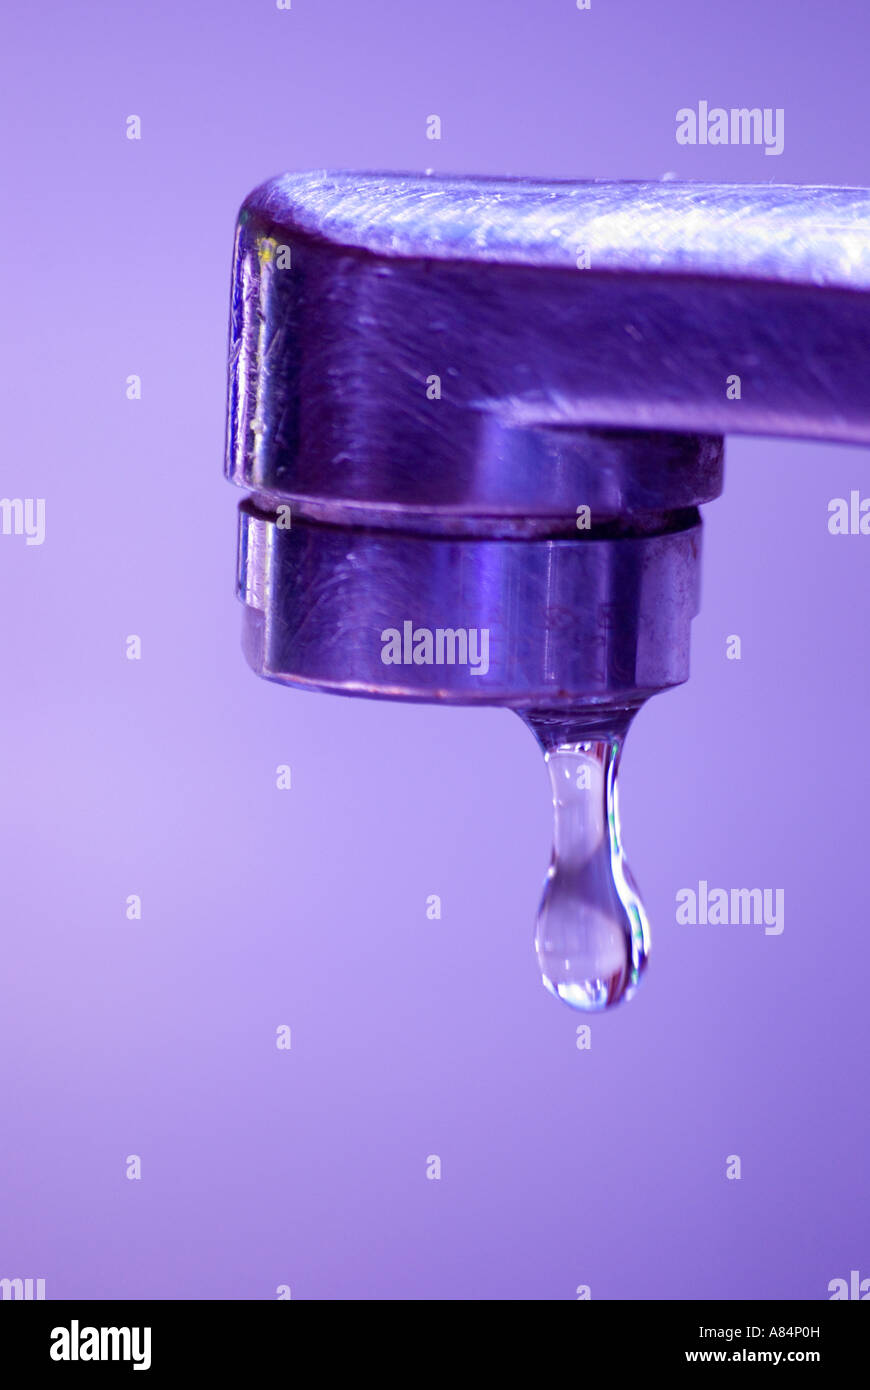 A dripping tap Stock Photo